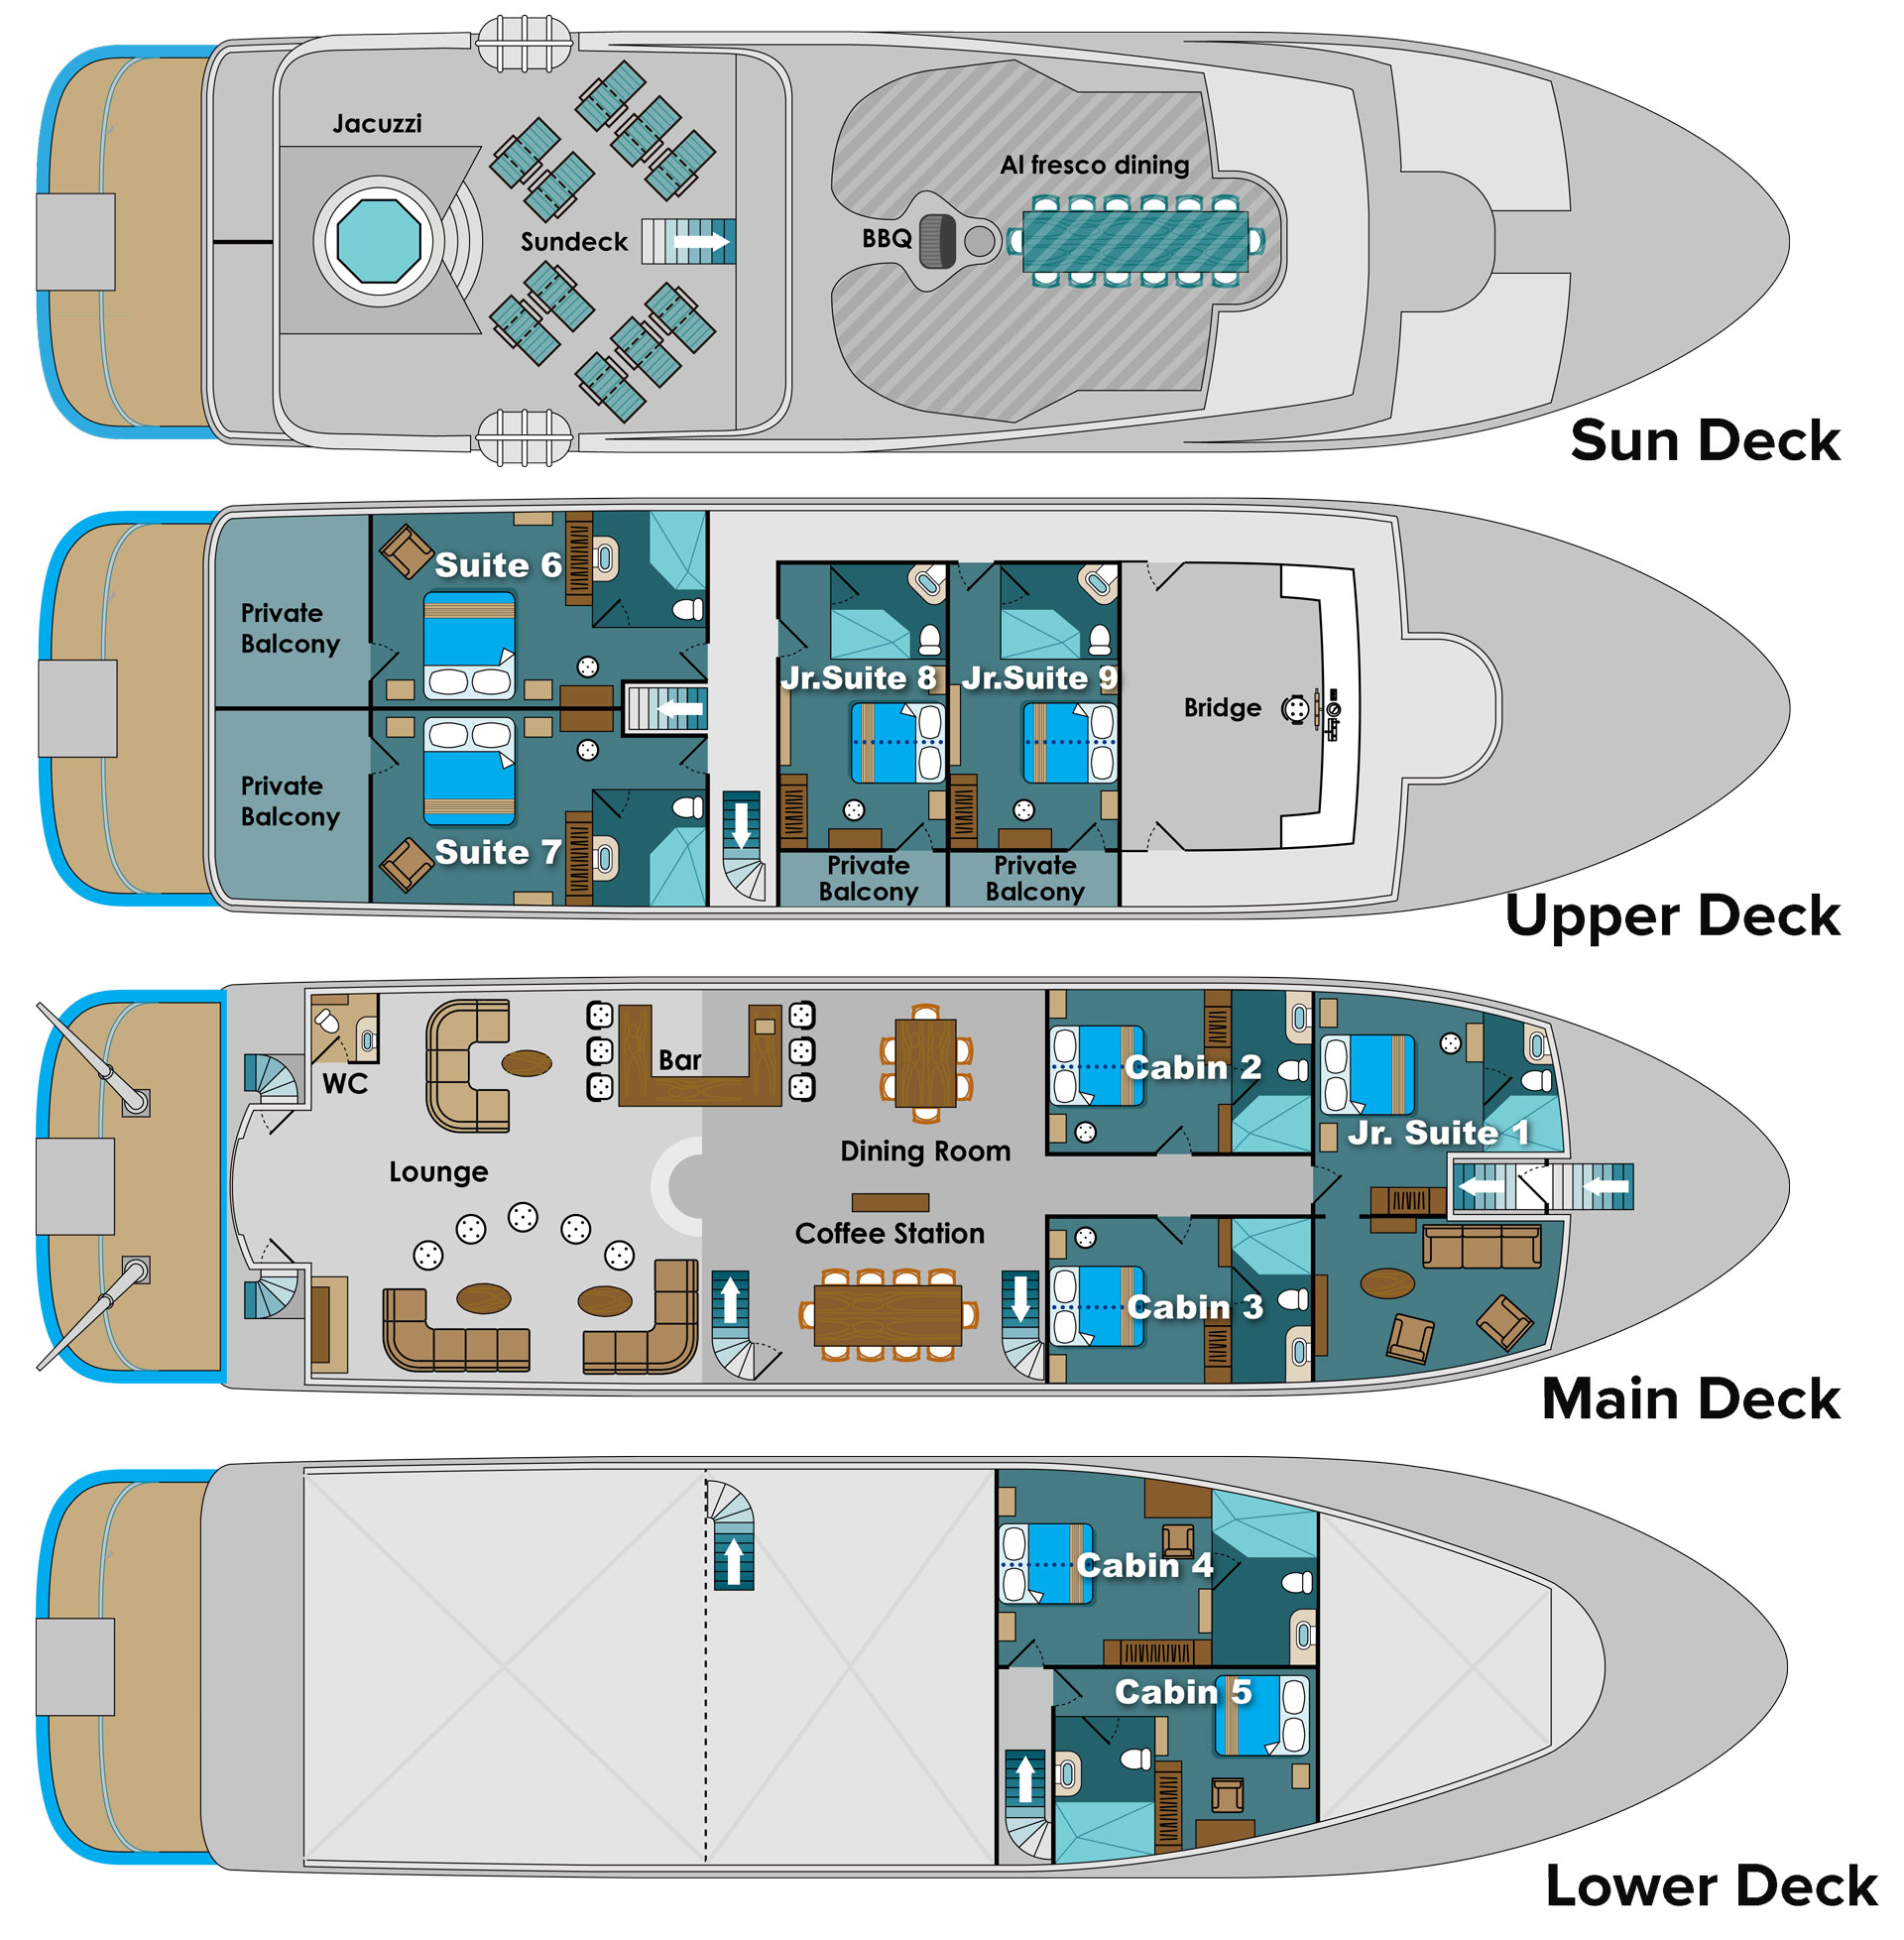 Deck plan of Natural Paradise yacht in Galapagos with 4 passenger decks, 3 Junior Suites, 2 Suites, 4 cabins & Jacuzzi.